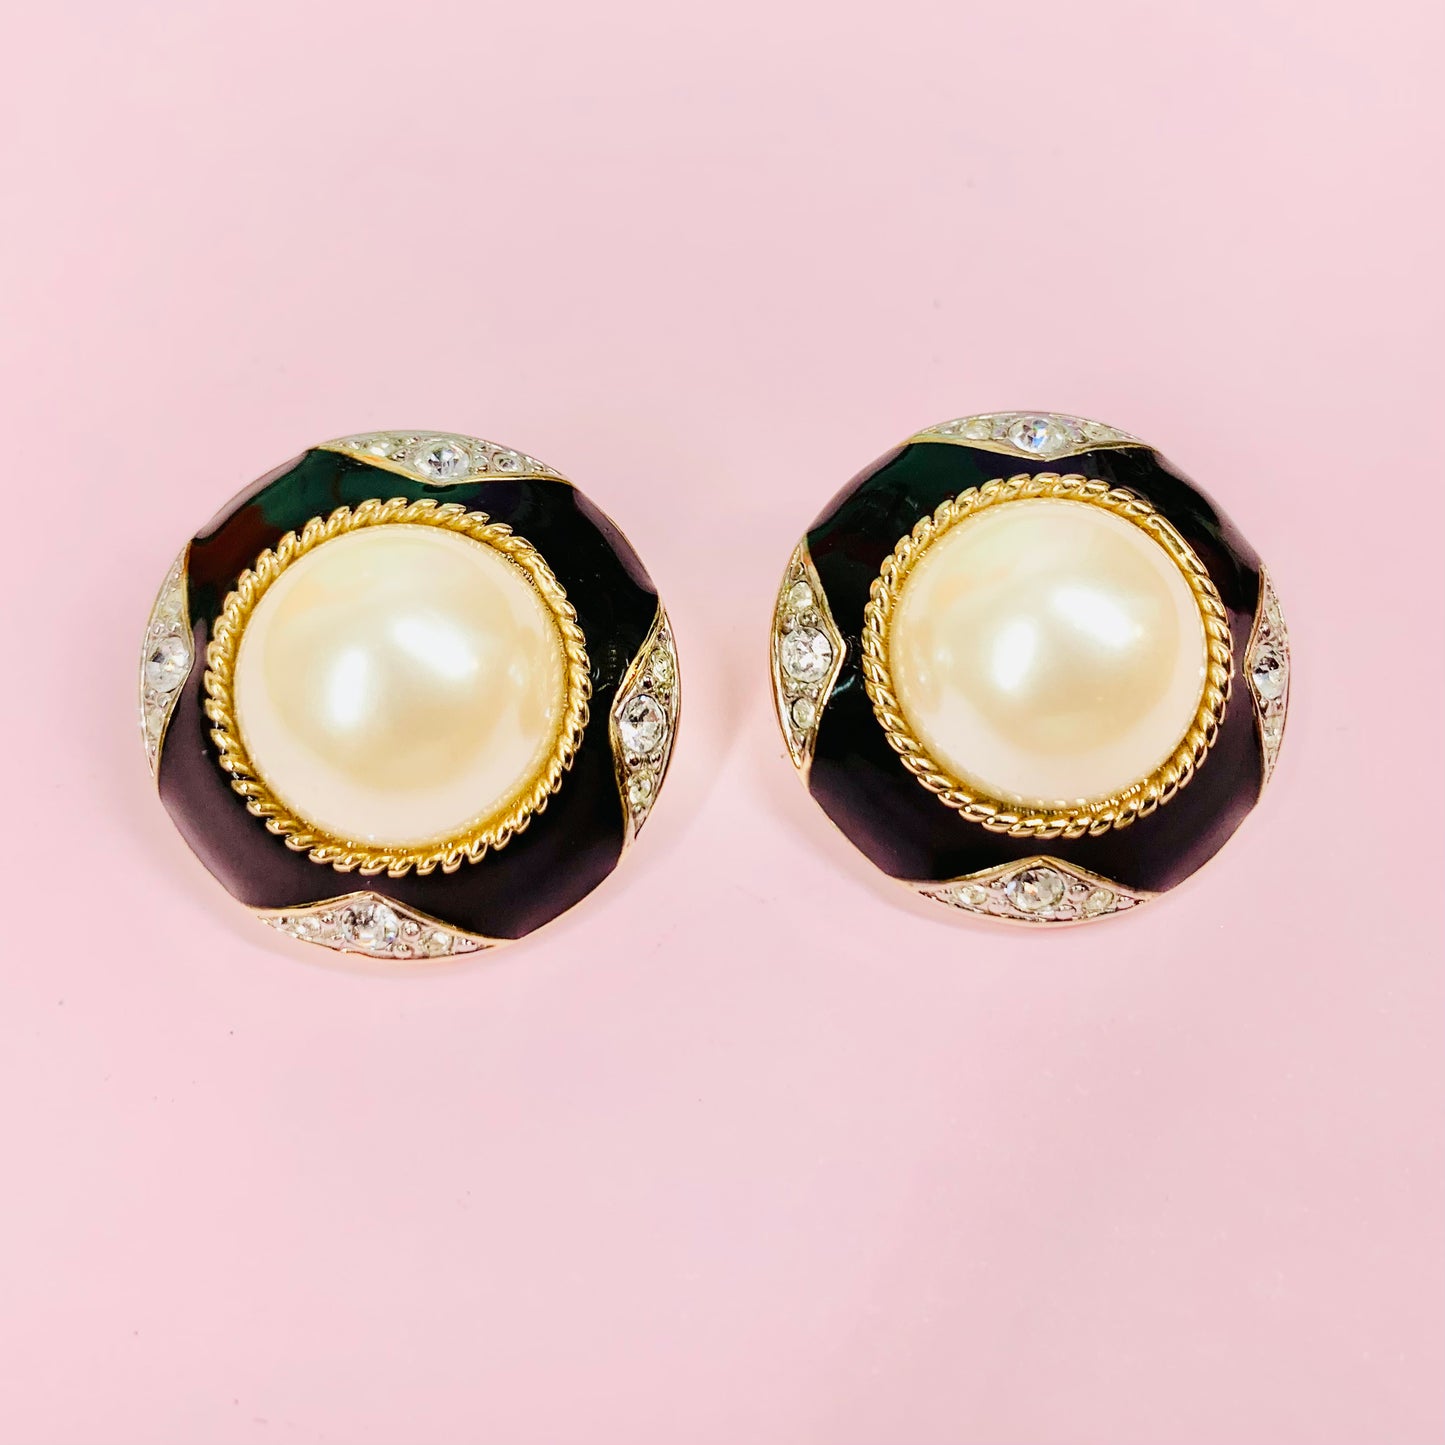 Extremely rare stunning 1960s gold plated clip on black enamel, pearl & clear rhinestones button earrings